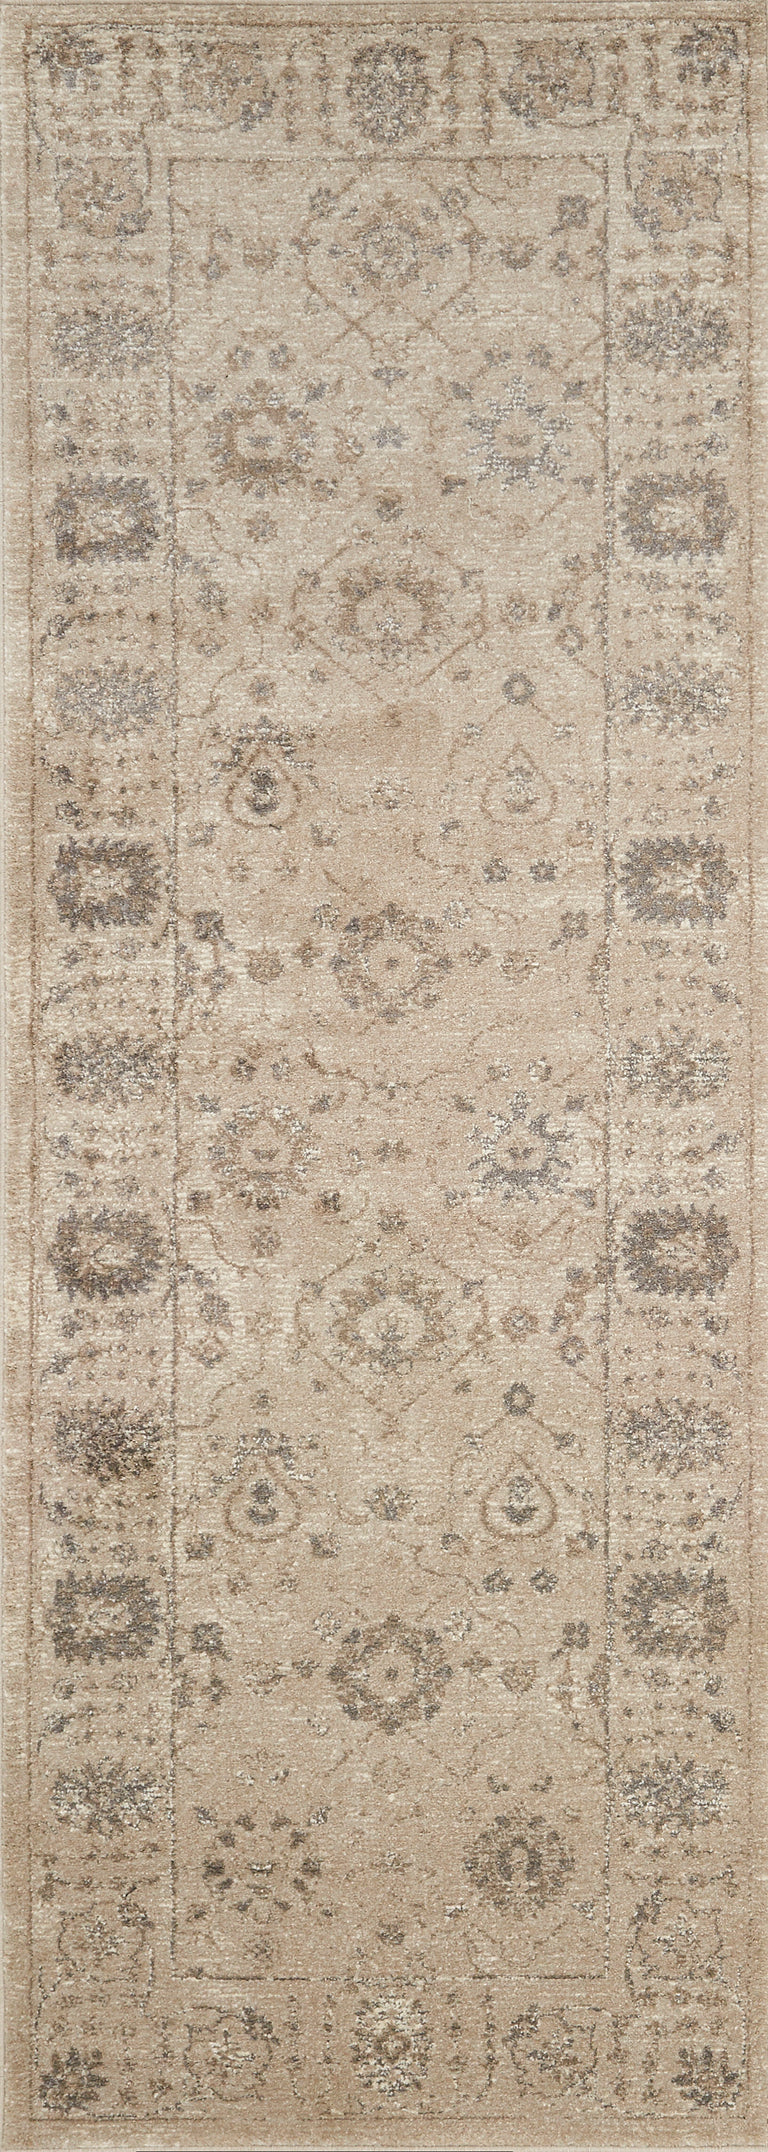 Loloi Rugs Century Collection Rug in Sand, Sand - 9'3" x 9'3"